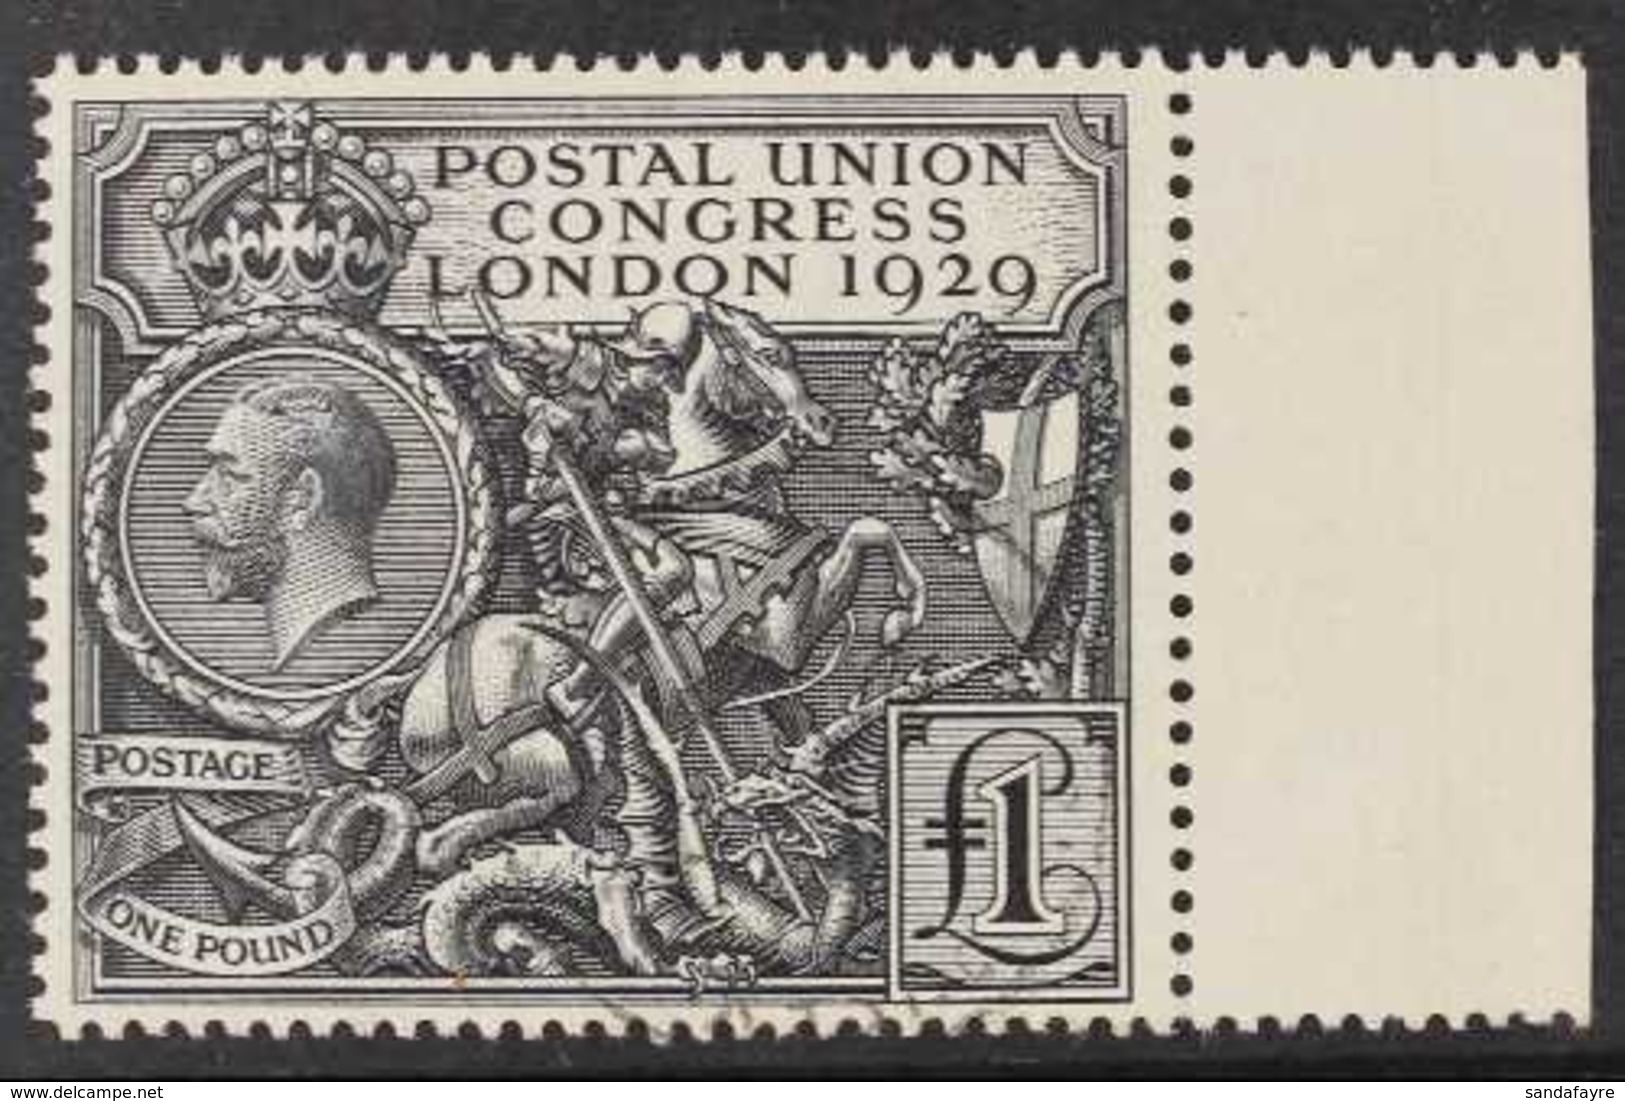 1929 £1 Black P.U.C., SG 438, Superb Marginal Used, Well Centered With Light Cds Cancel. A Beautiful Stamp. For More Ima - Unclassified